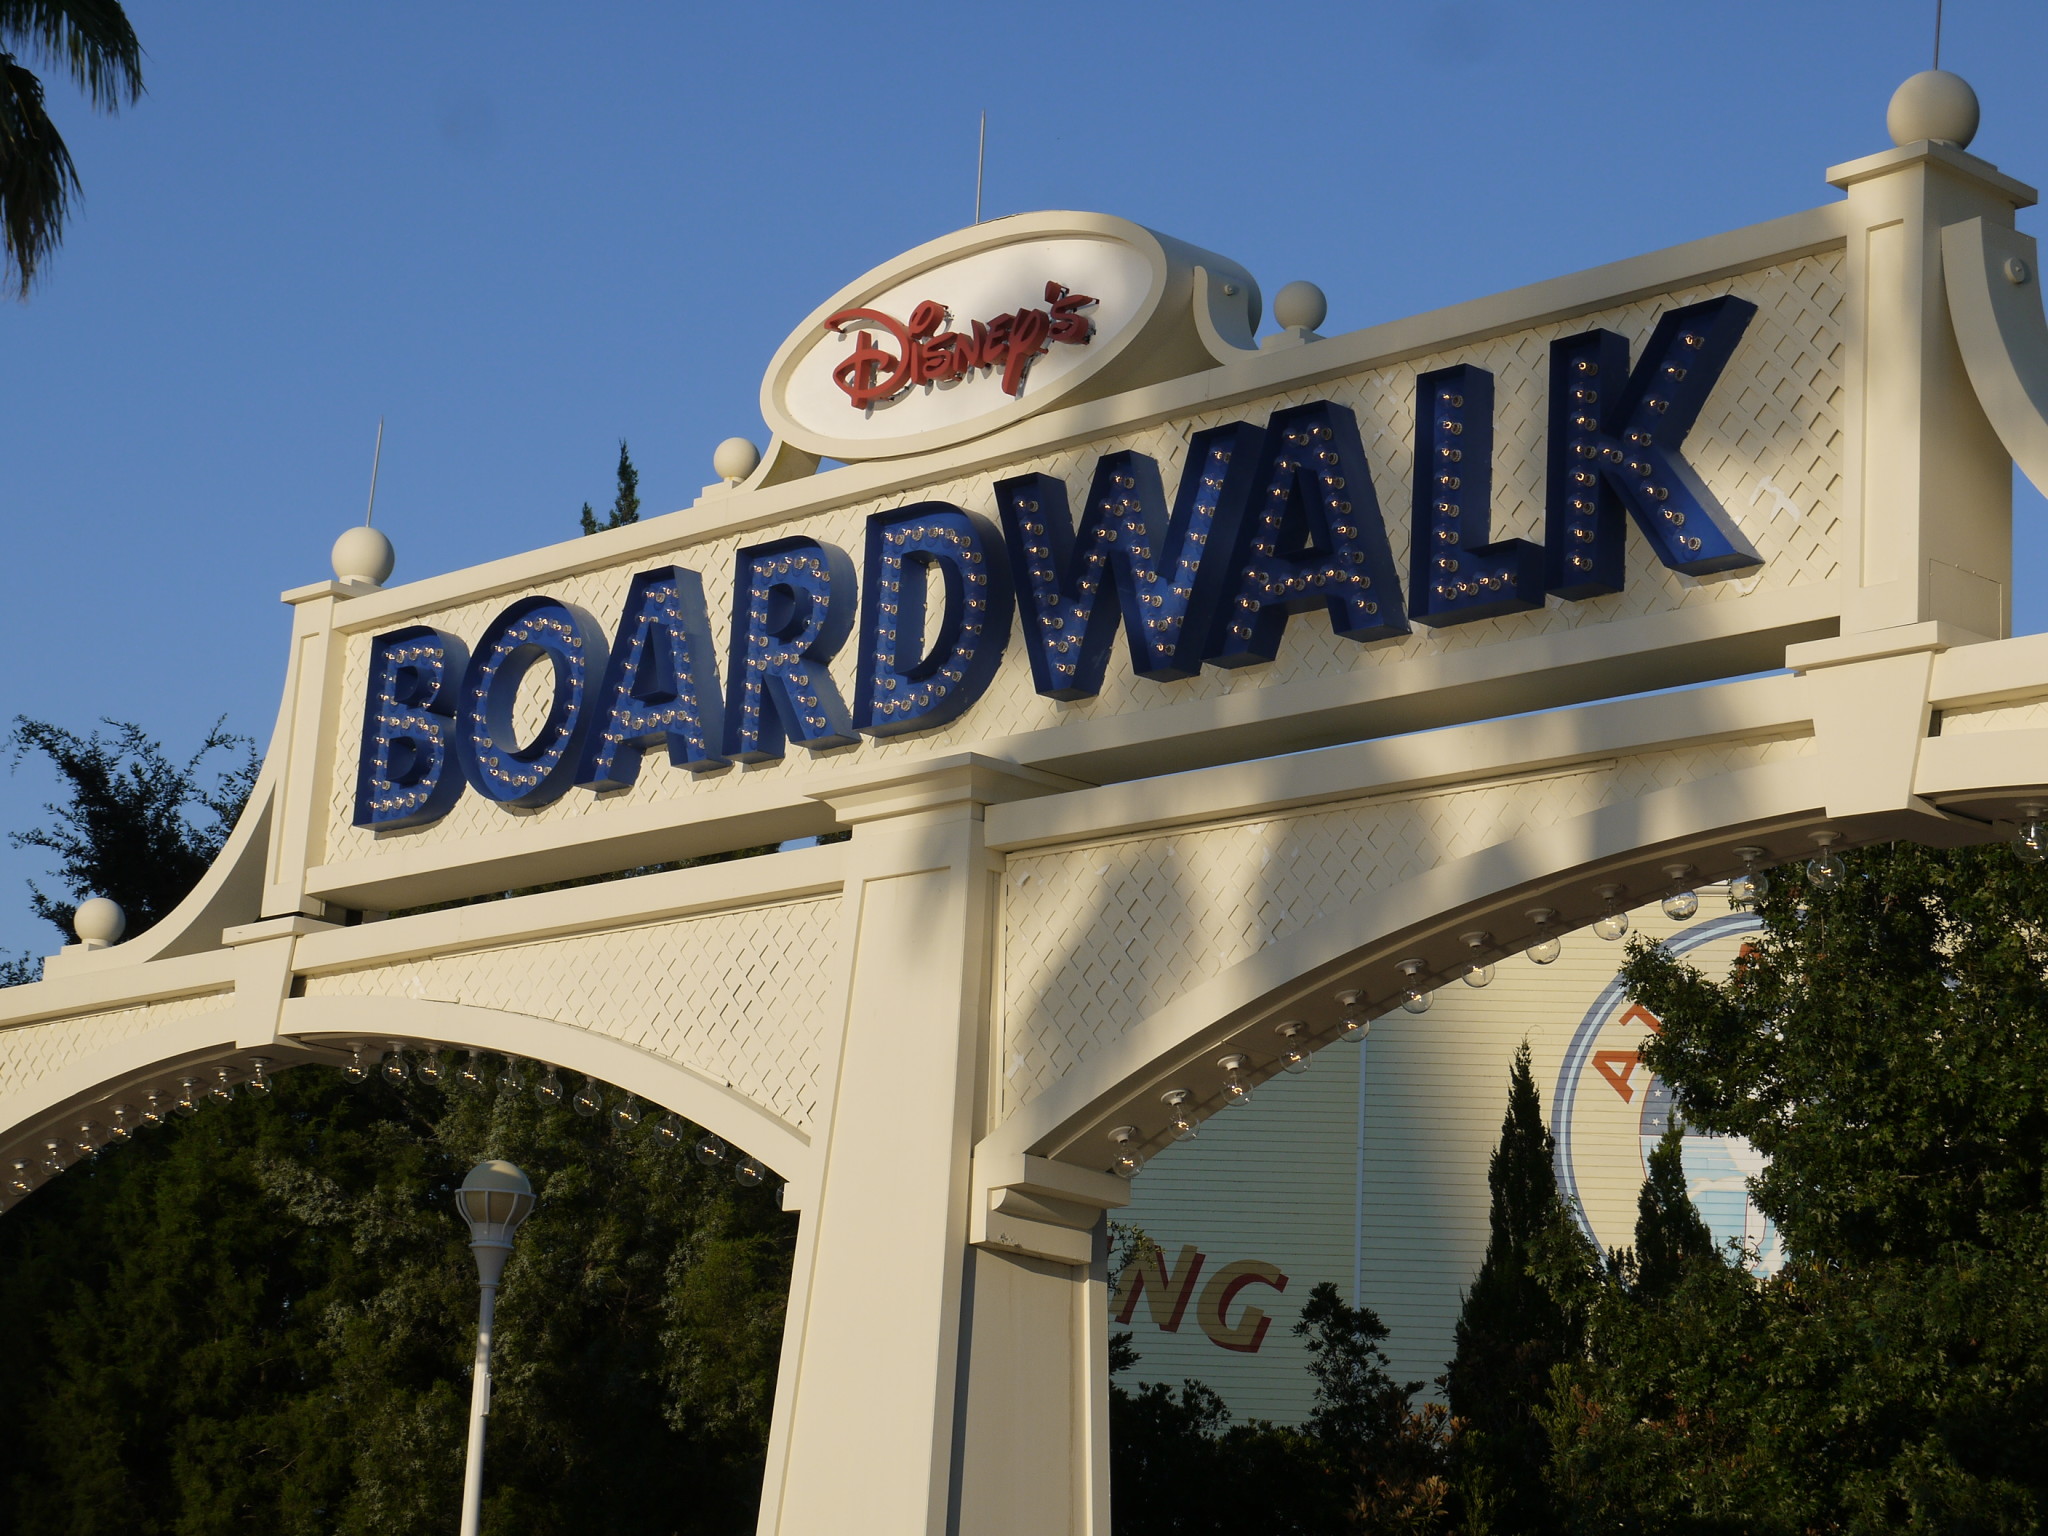 Top 10 Things to Do When You Want a Break from the WDW Theme Parks